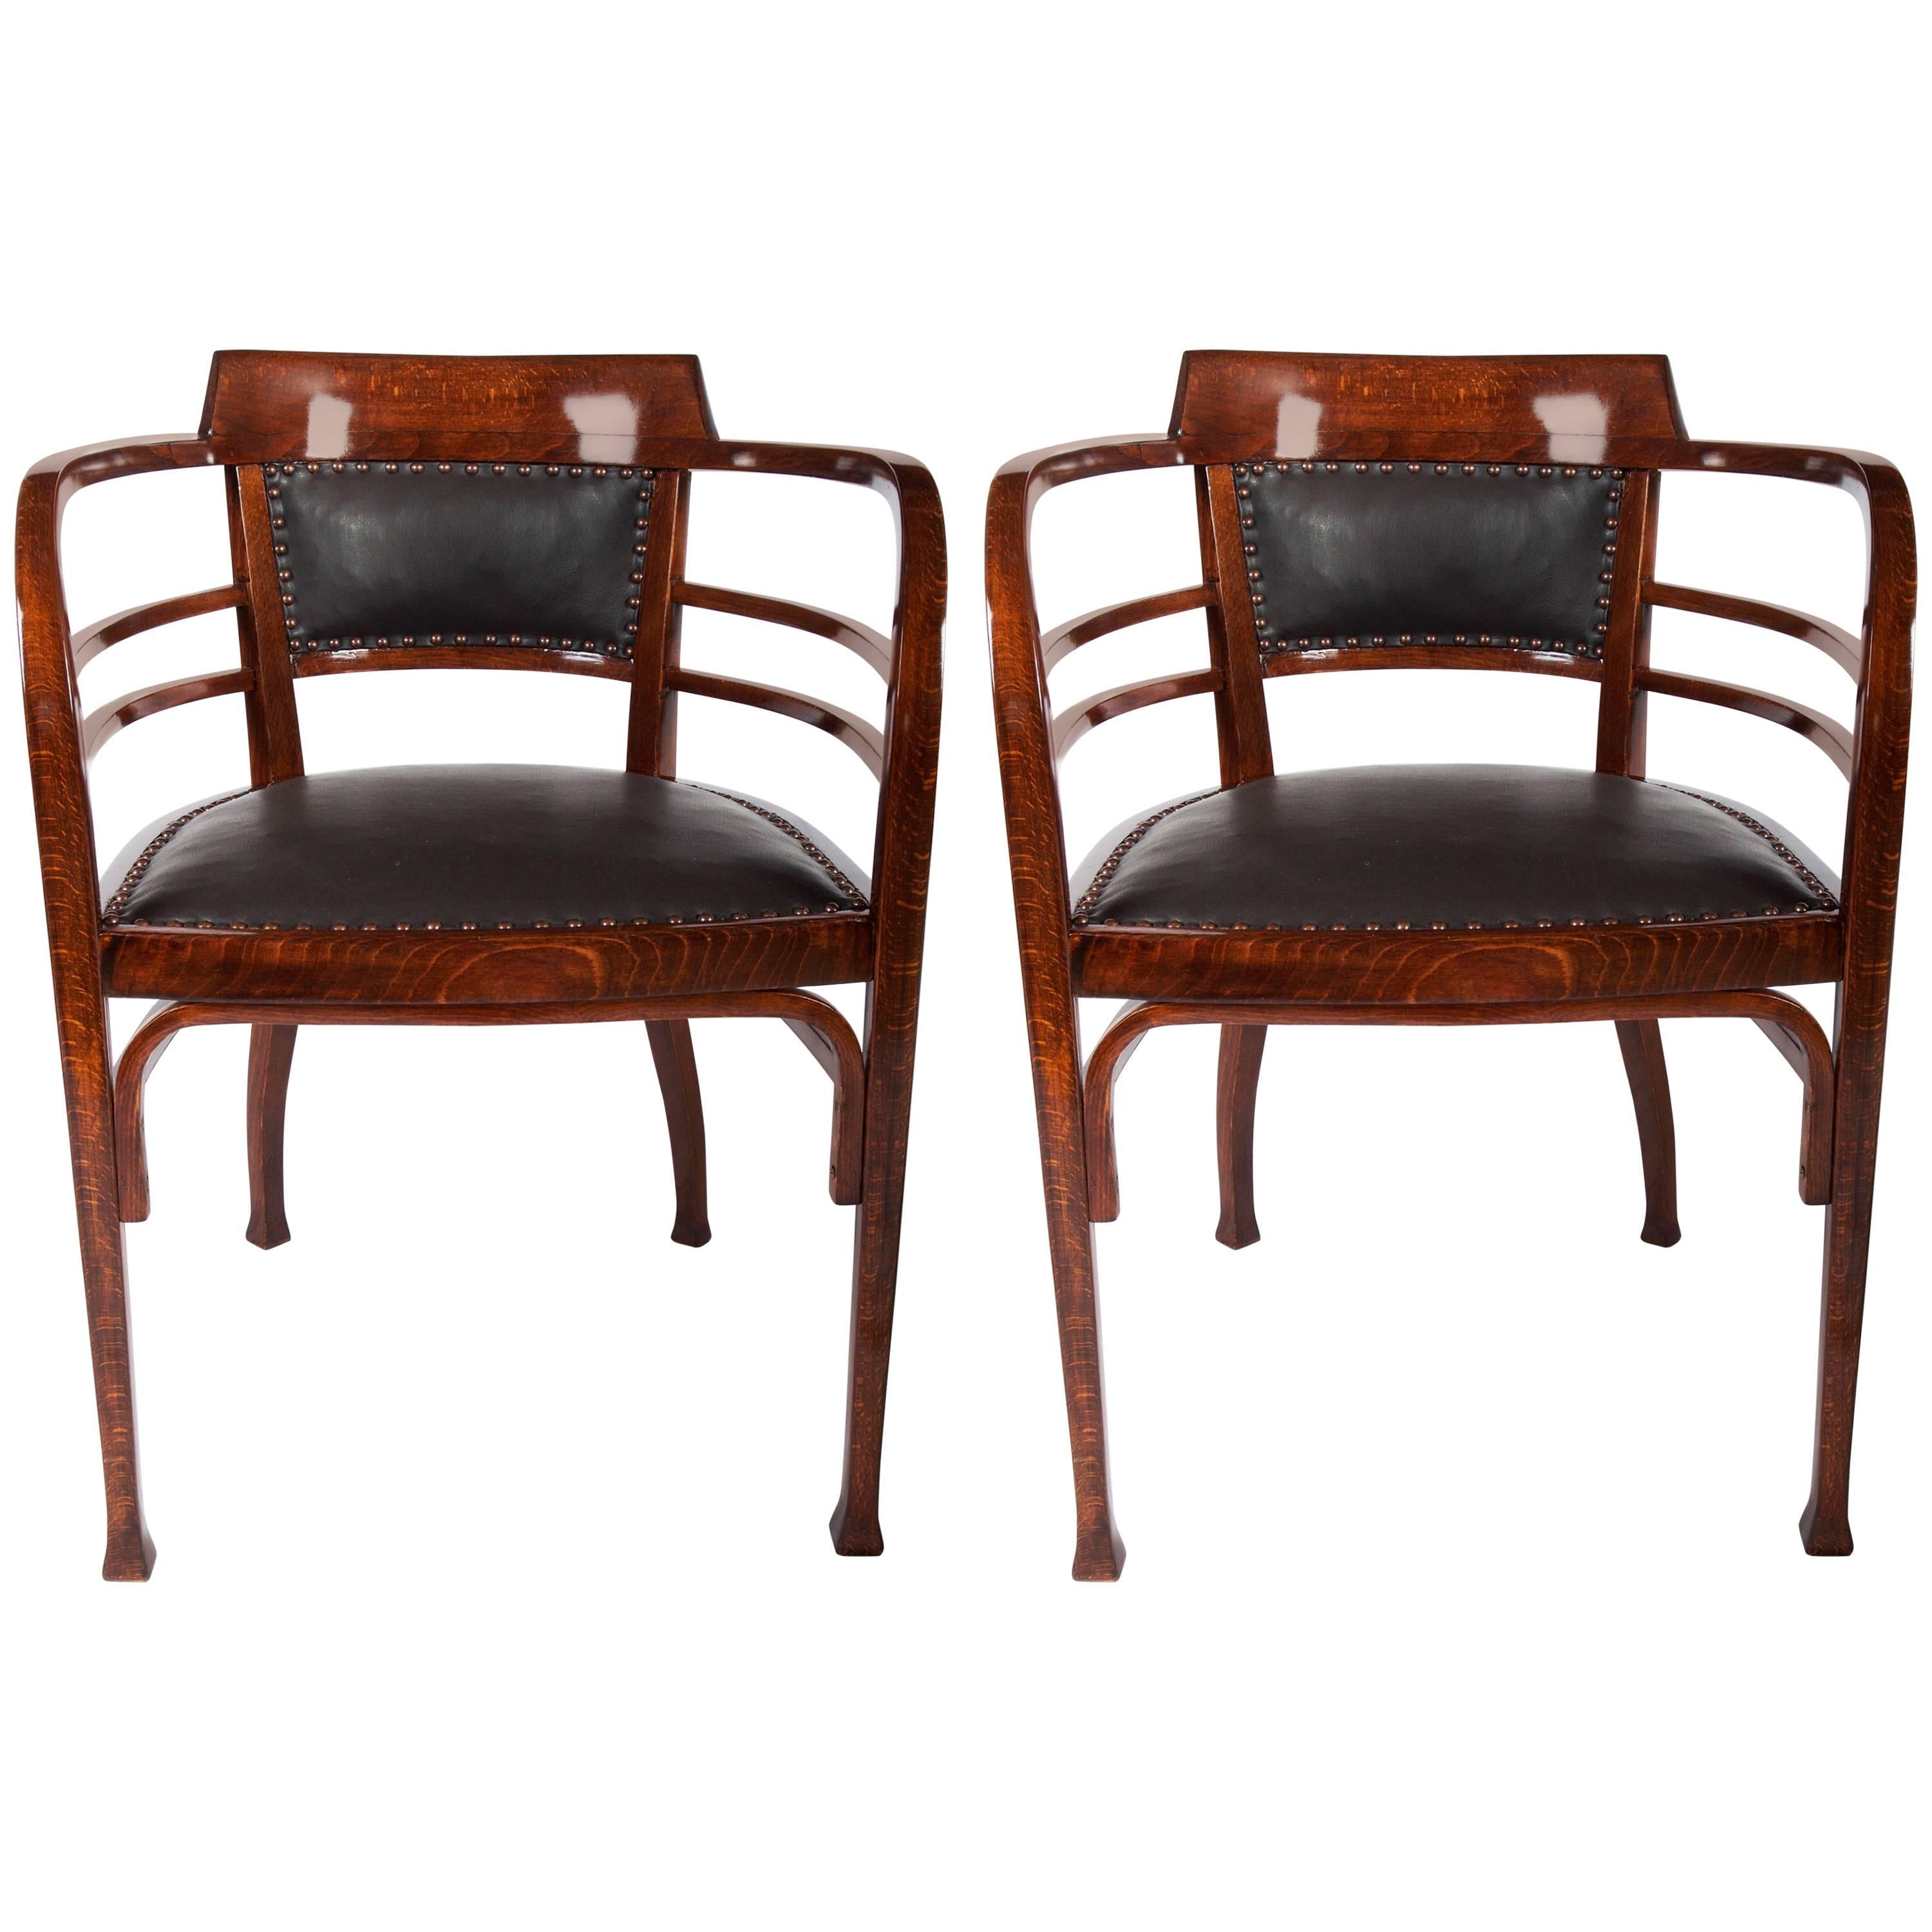 Thonet Armchairs by Otto Wagner